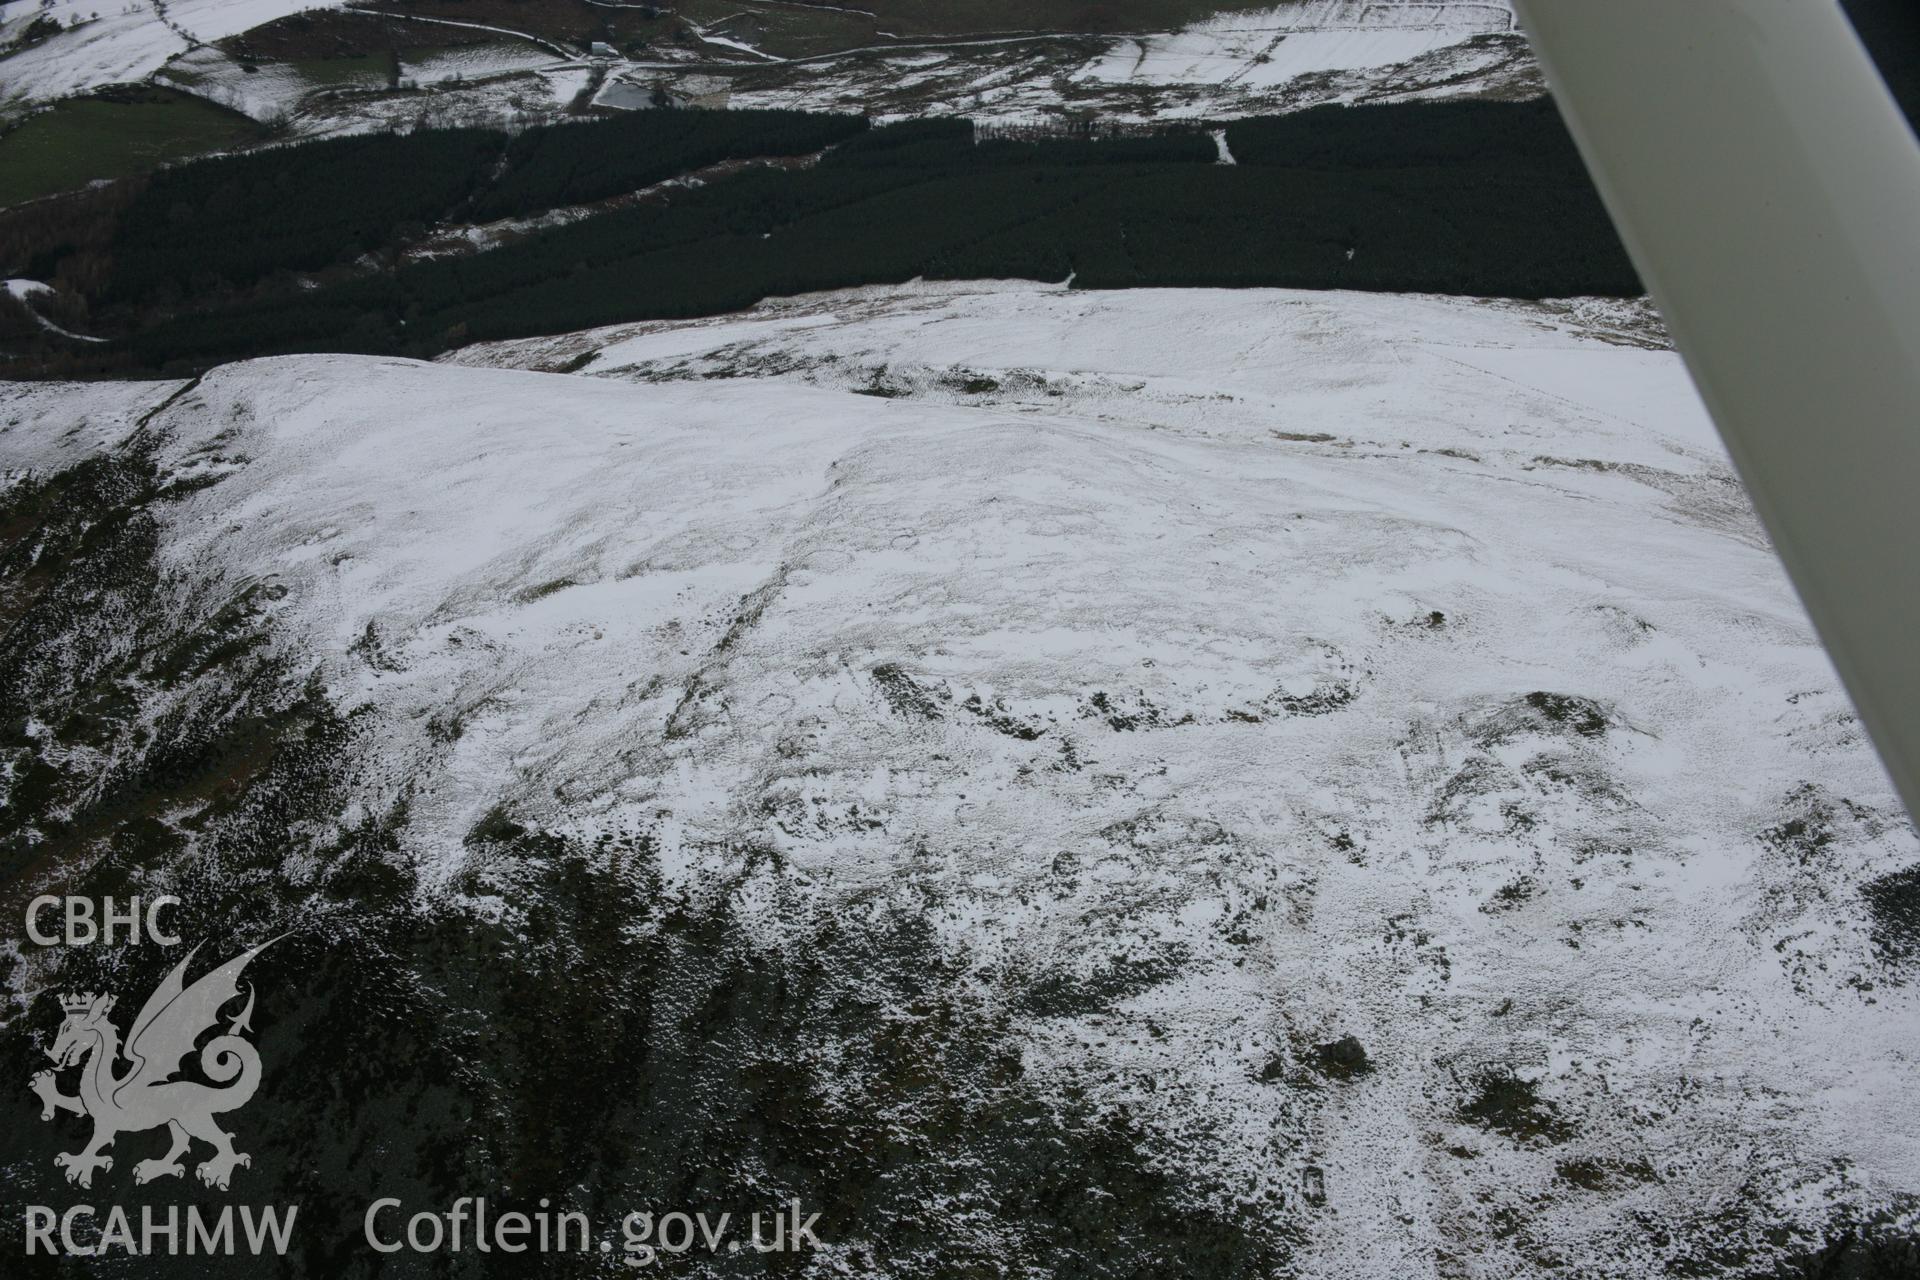 RCAHMW colour oblique aerial photograph of Craig Rhiwarth Hillfort under snow from the south. Taken on 06 March 2006 by Toby Driver.